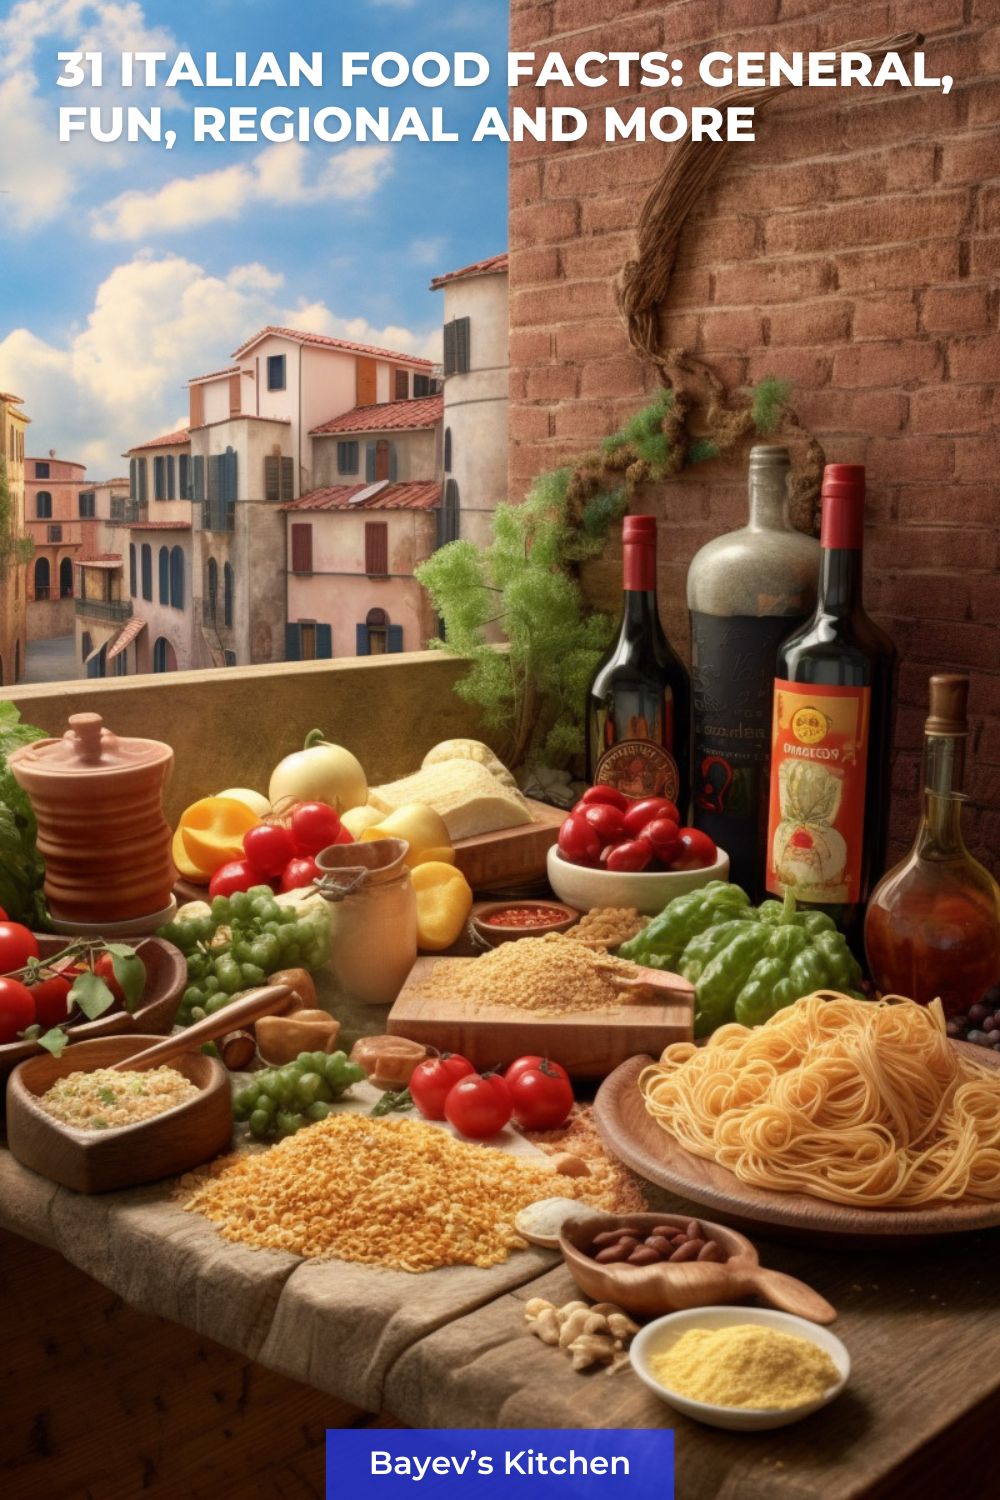 31 Italian Food Facts: General, Fun, Regional and more by bayevskitchen.com